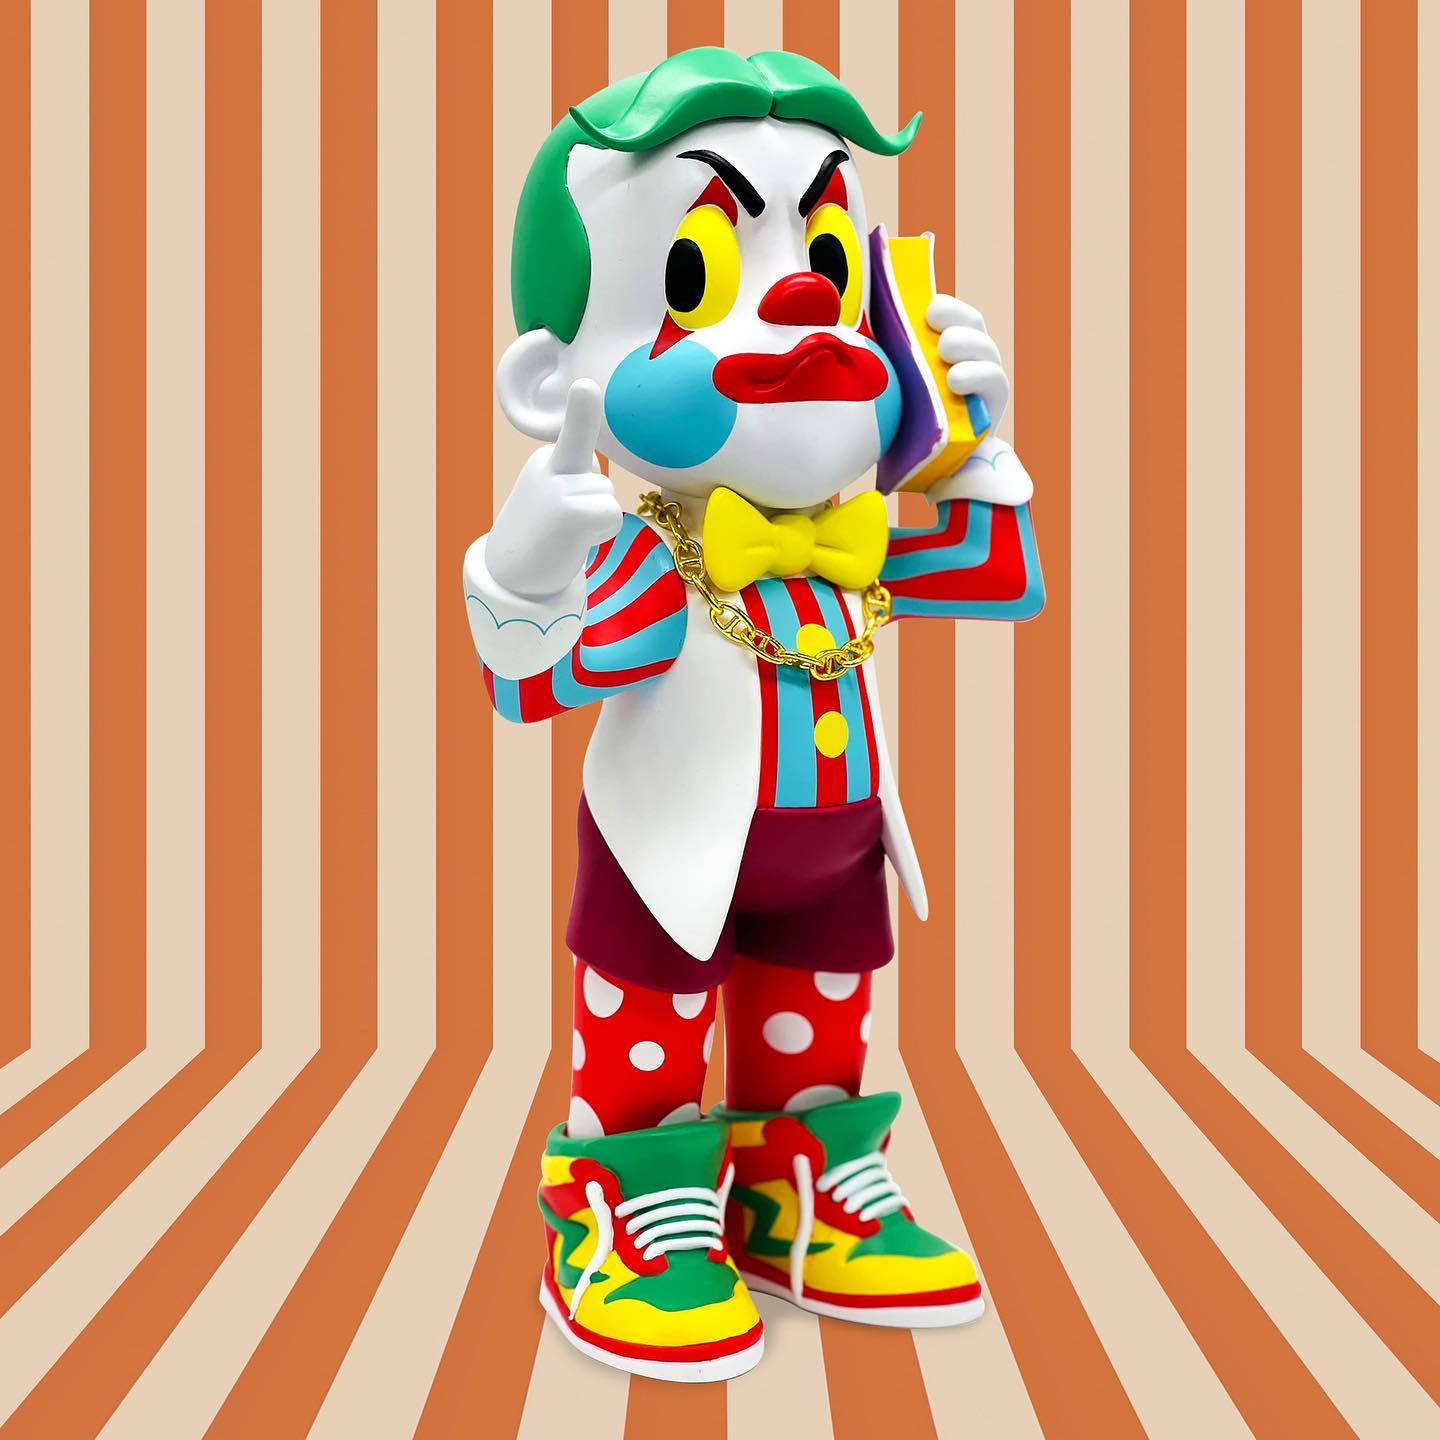 Boxy boo is now the creepiest clown!!! Project playtime 